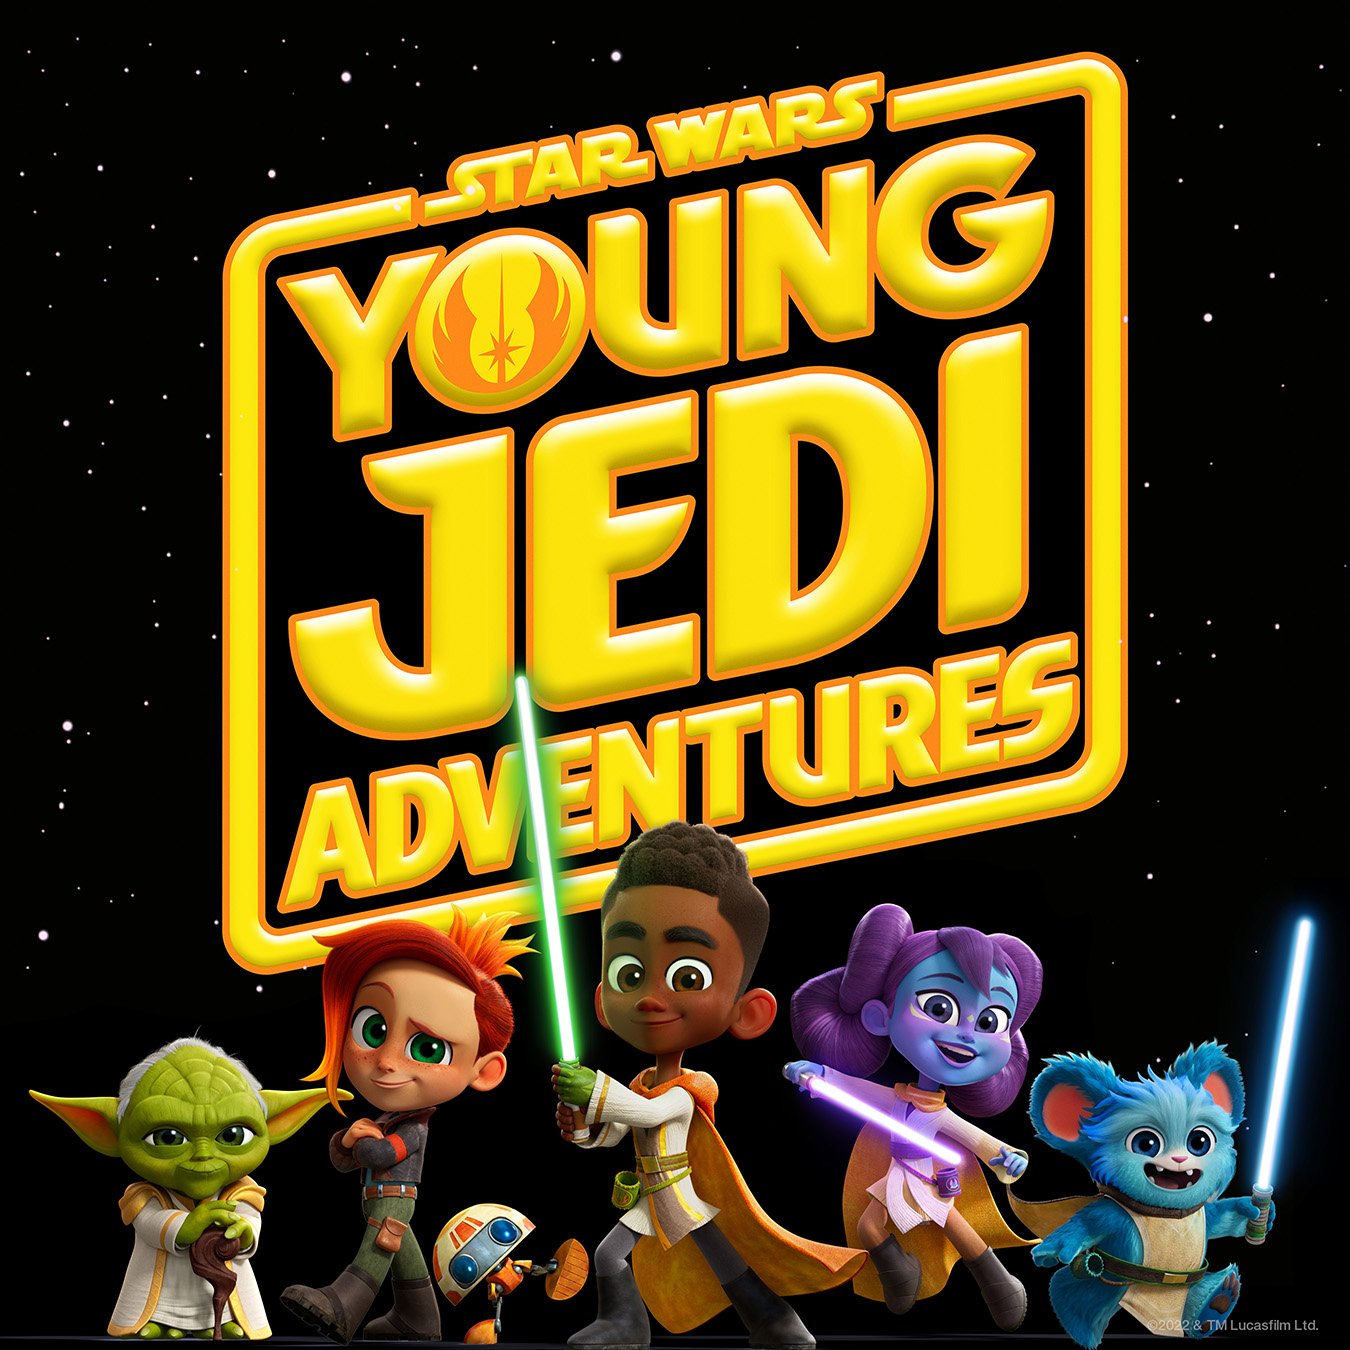 “Star Wars: Young Jedi Adventures”